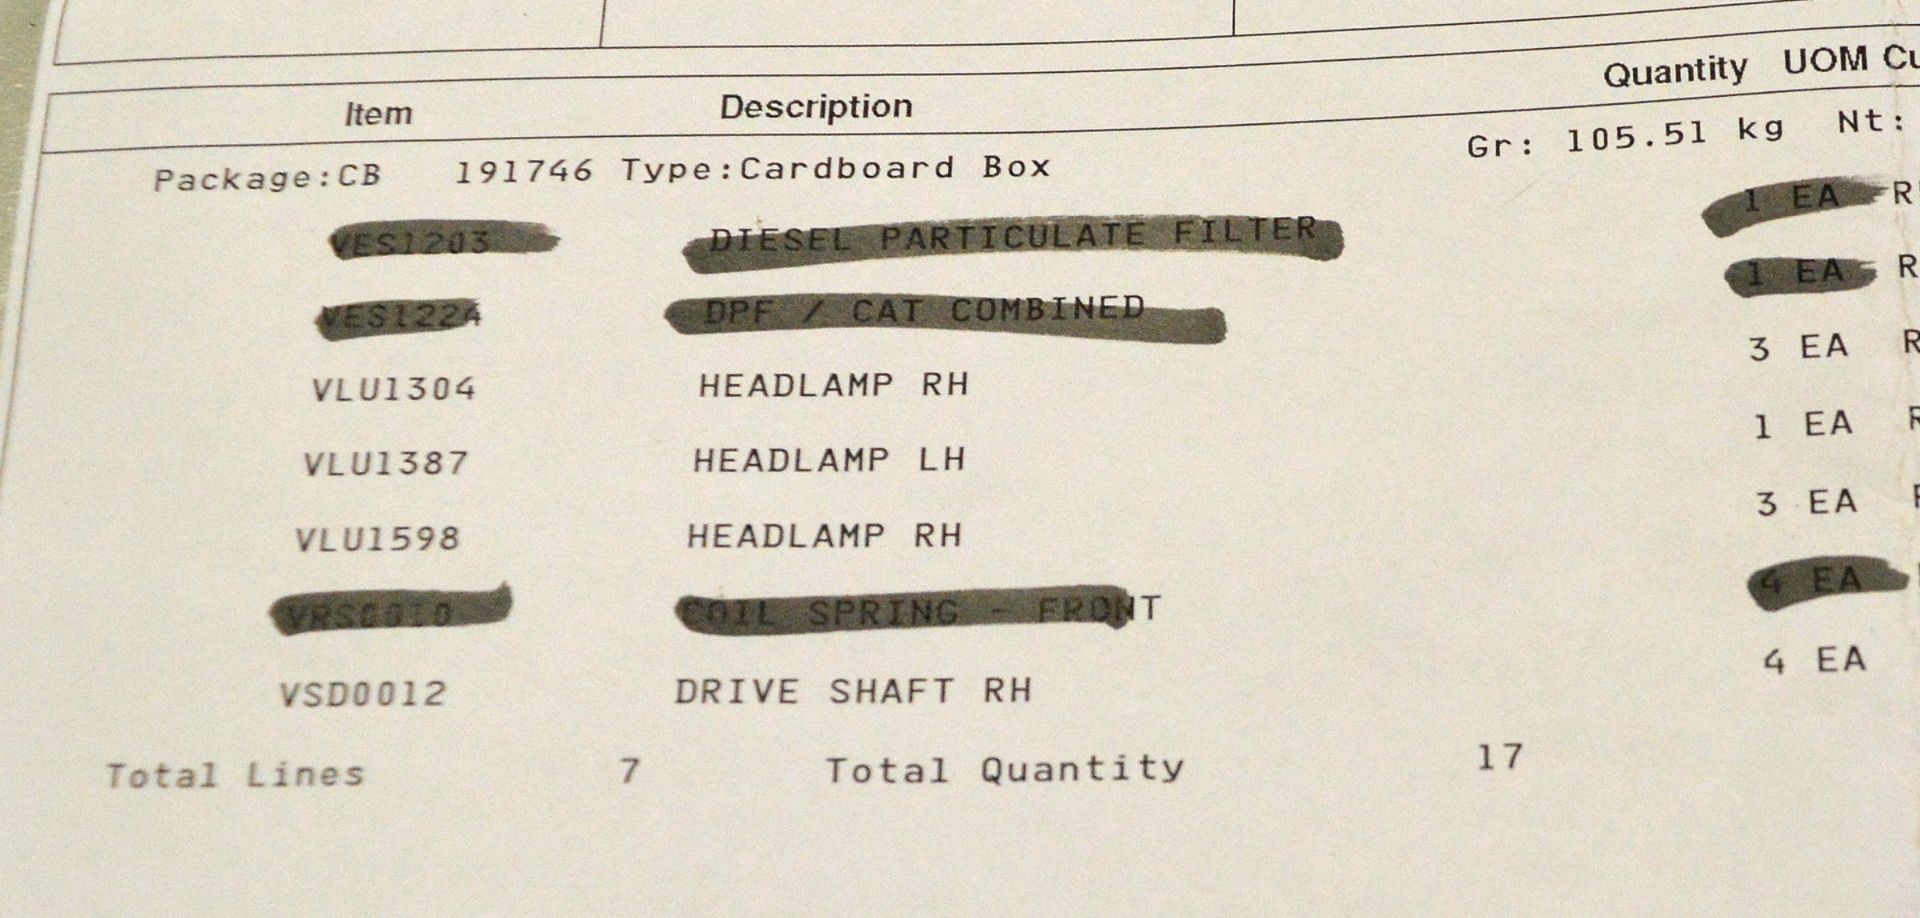 Vehicle parts - head lamp assemblies RH & LH, RH drive shafts - see picture for itinerary - Image 5 of 5